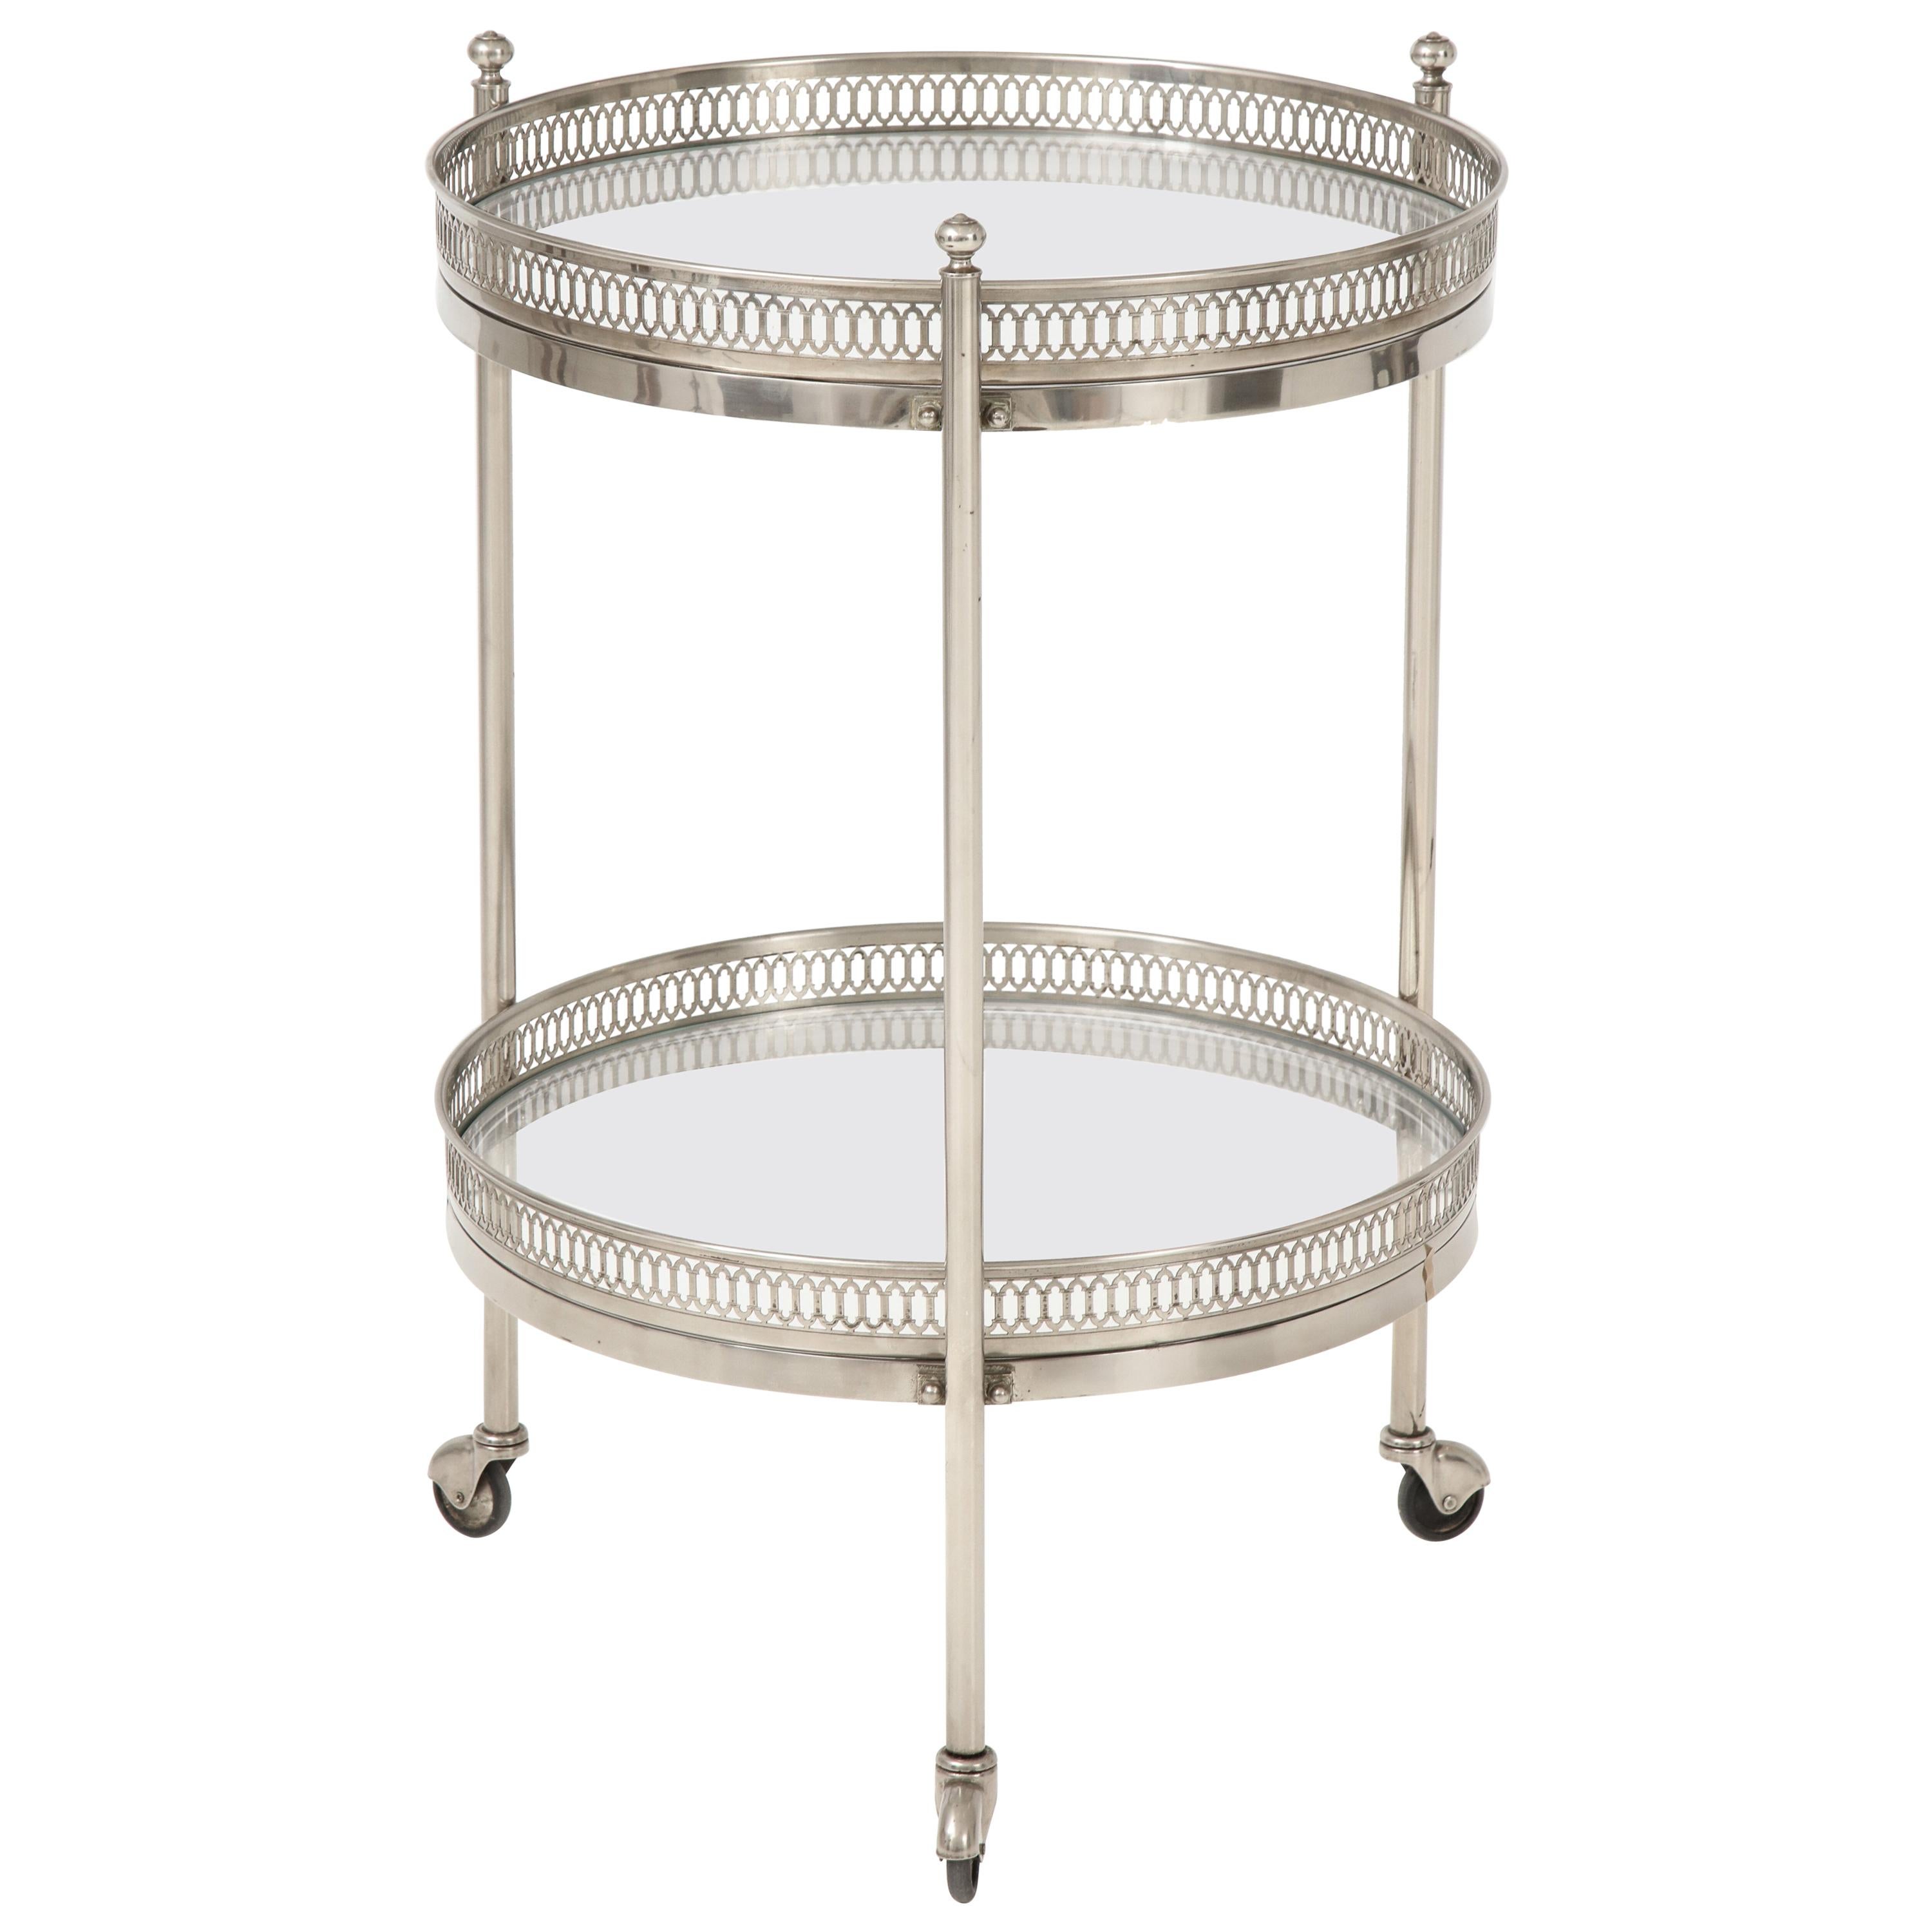 Two-Tier Bar Cart in Polished Nickel